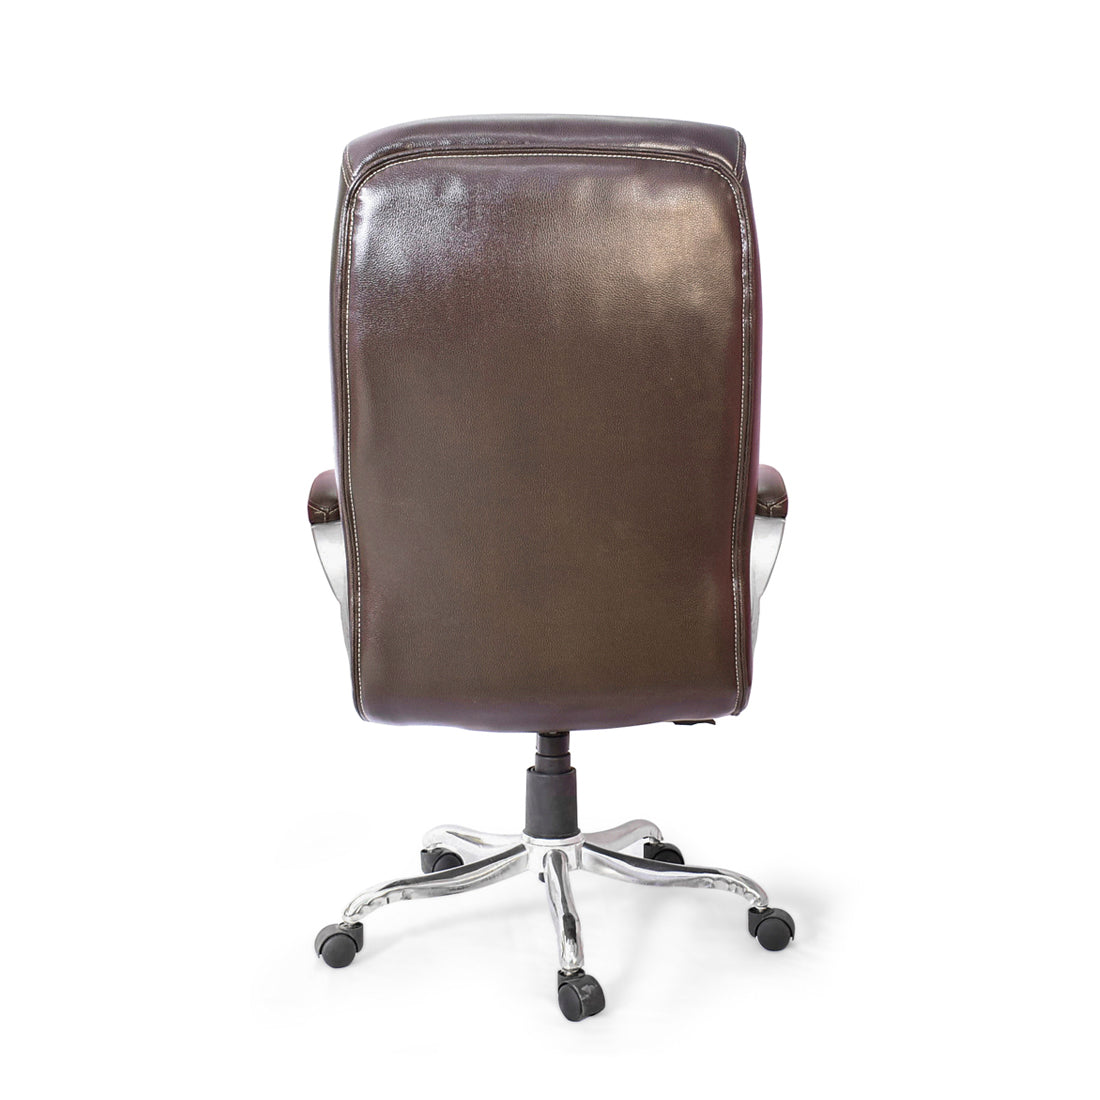 High Back Executive Chair Leatherette Fabric (Black)